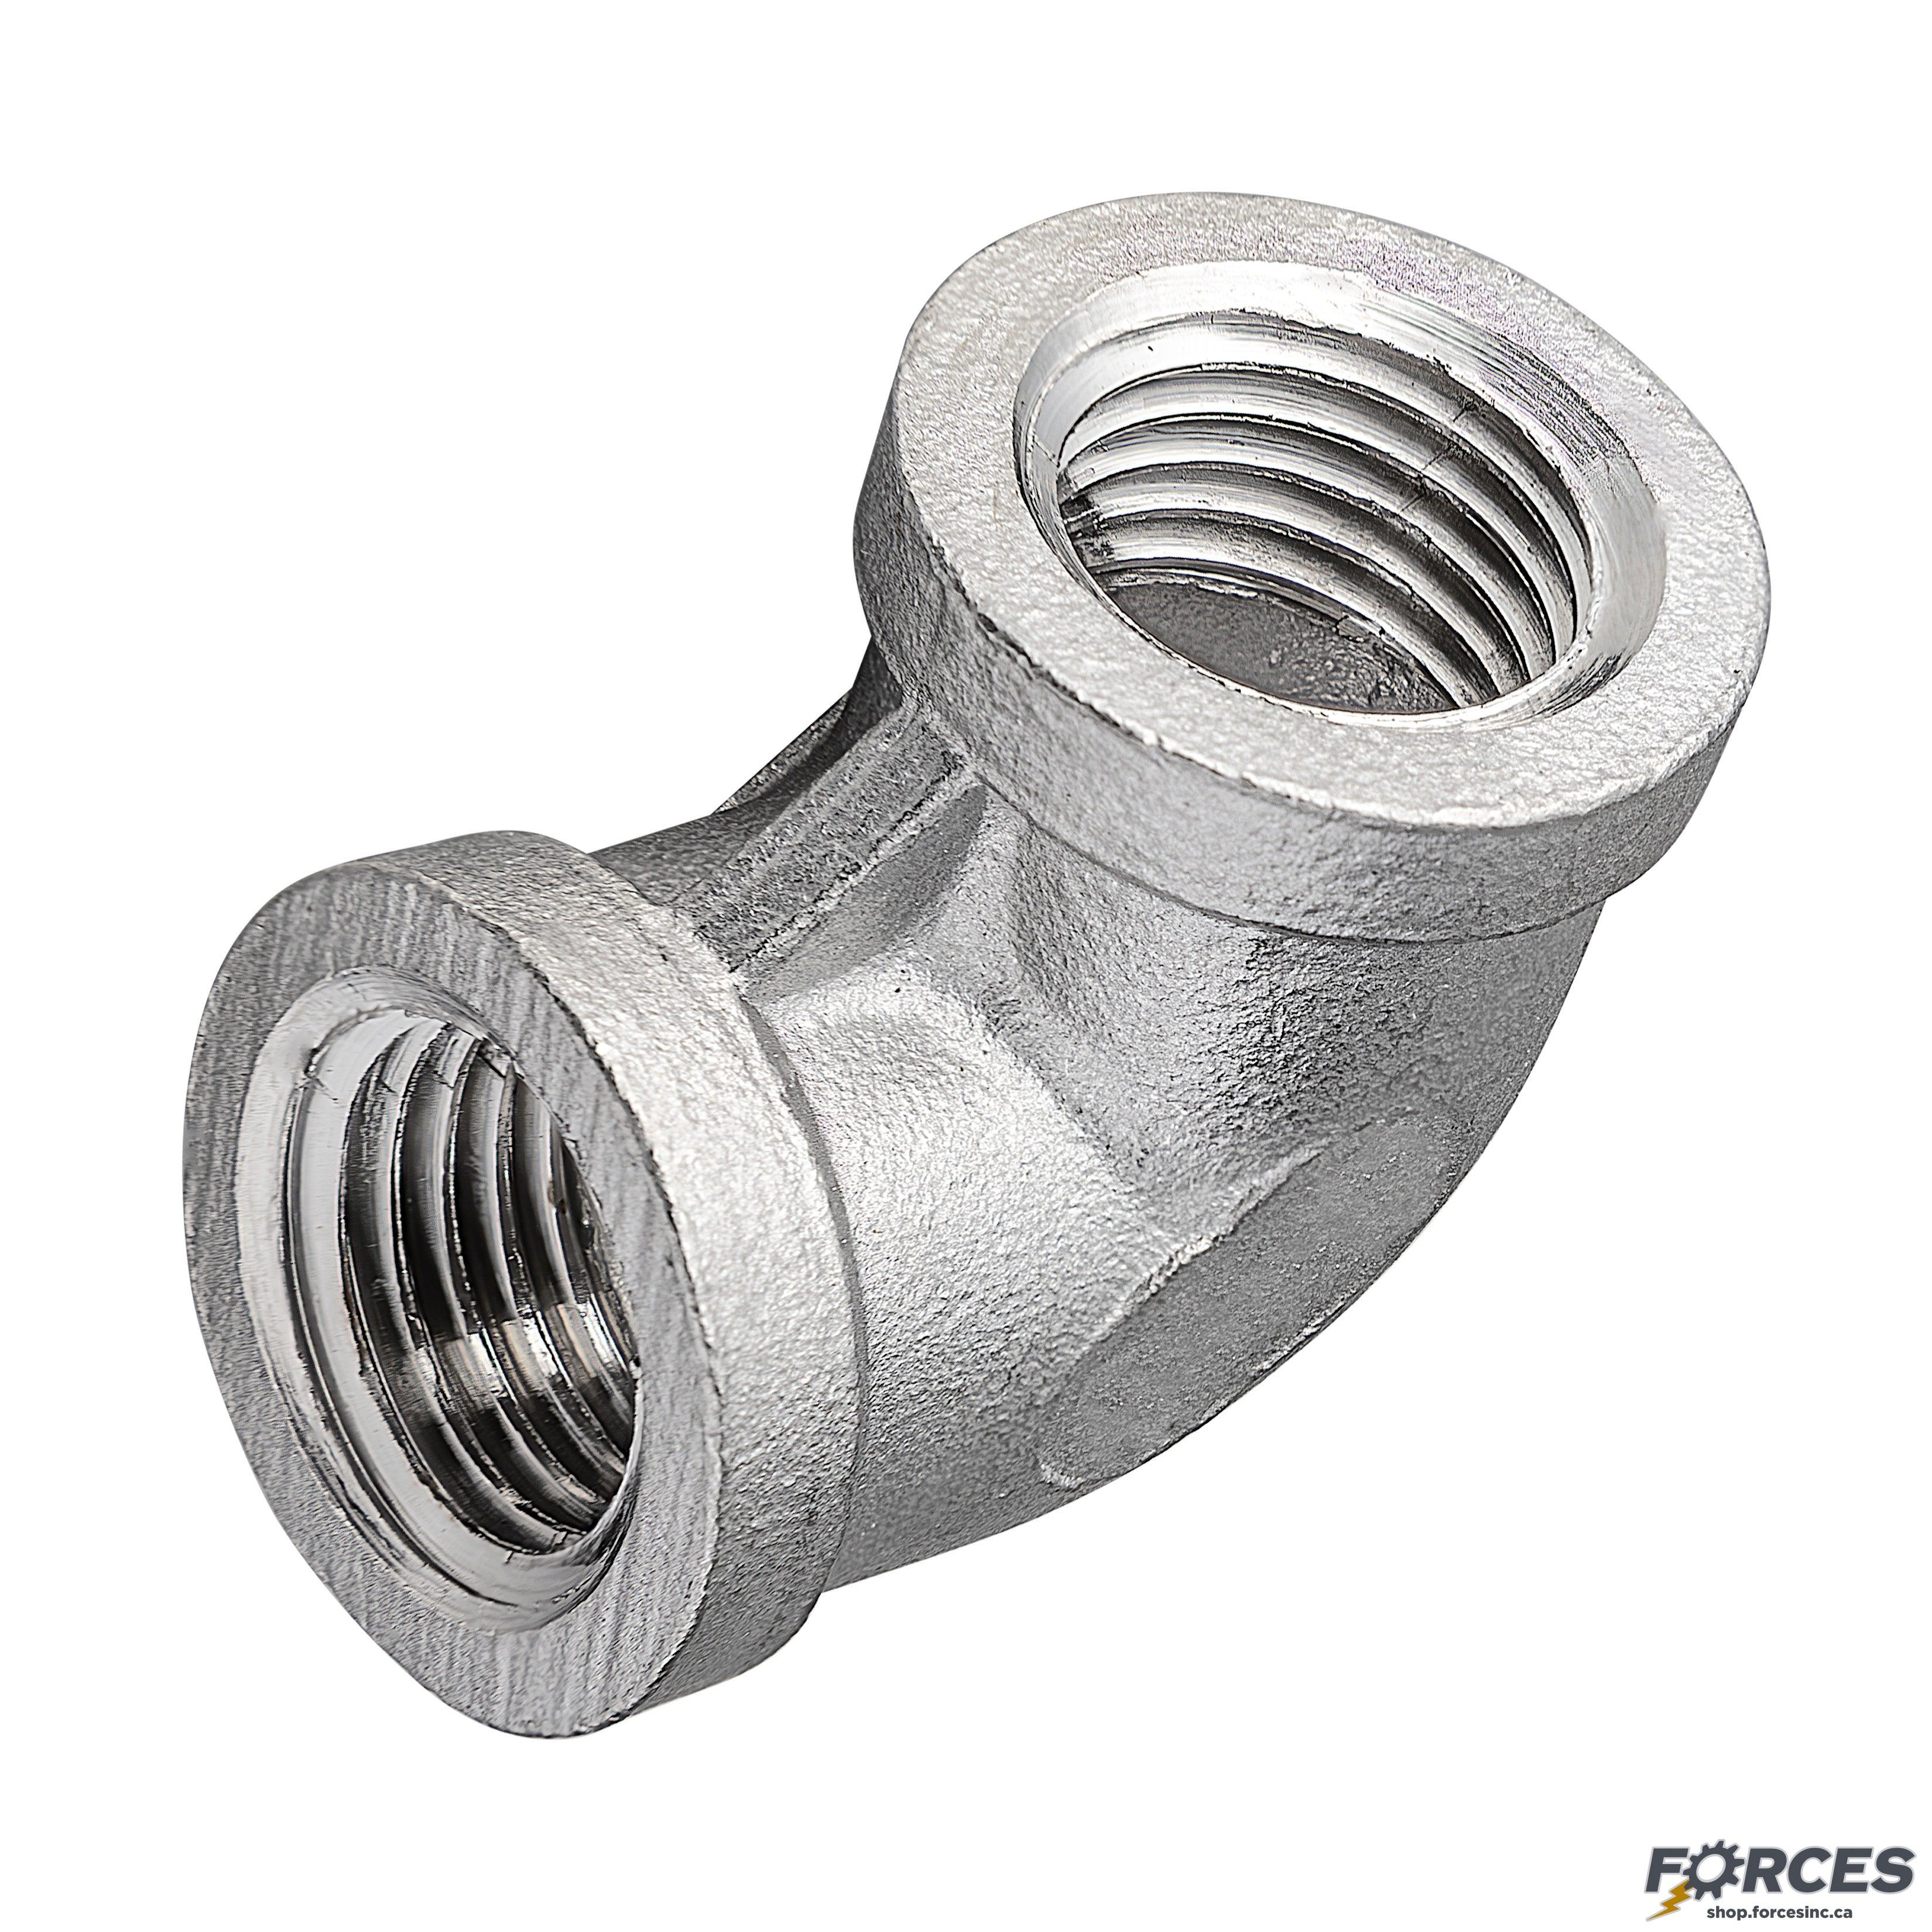 1-1/2" Elbow 90° NPT #150 - Stainless Steel 316 - Forces Inc